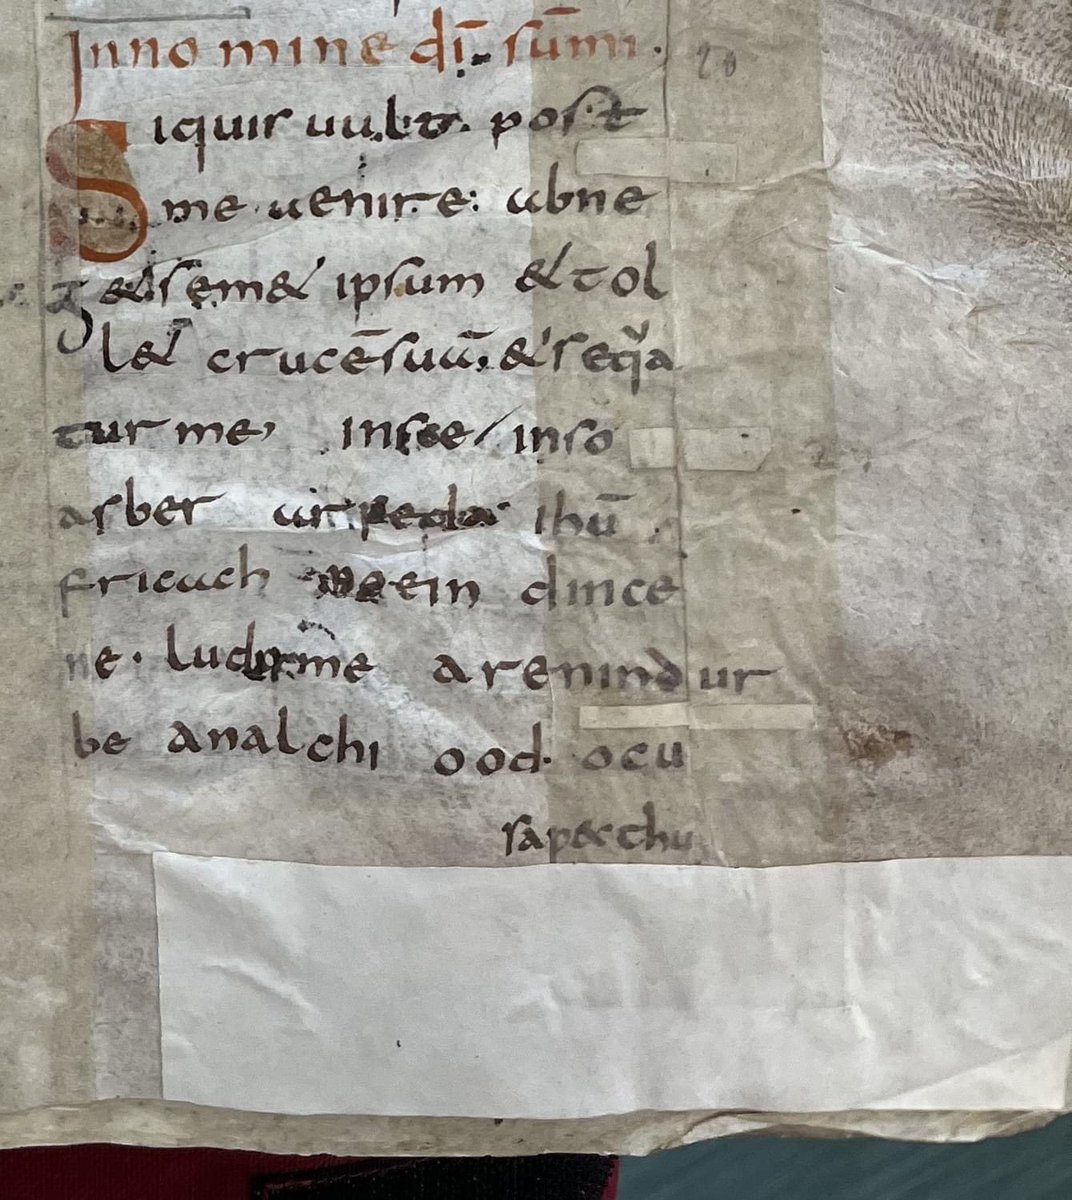 Last week I had the great privilege of looking at Cambrai MS 679, which has the oldest example of Old Irish prose (fols. 37r-38r), a homily on the colours of martyrdom. #manuscript #medieval #ManuscriptMonday #oldirish (1/2)